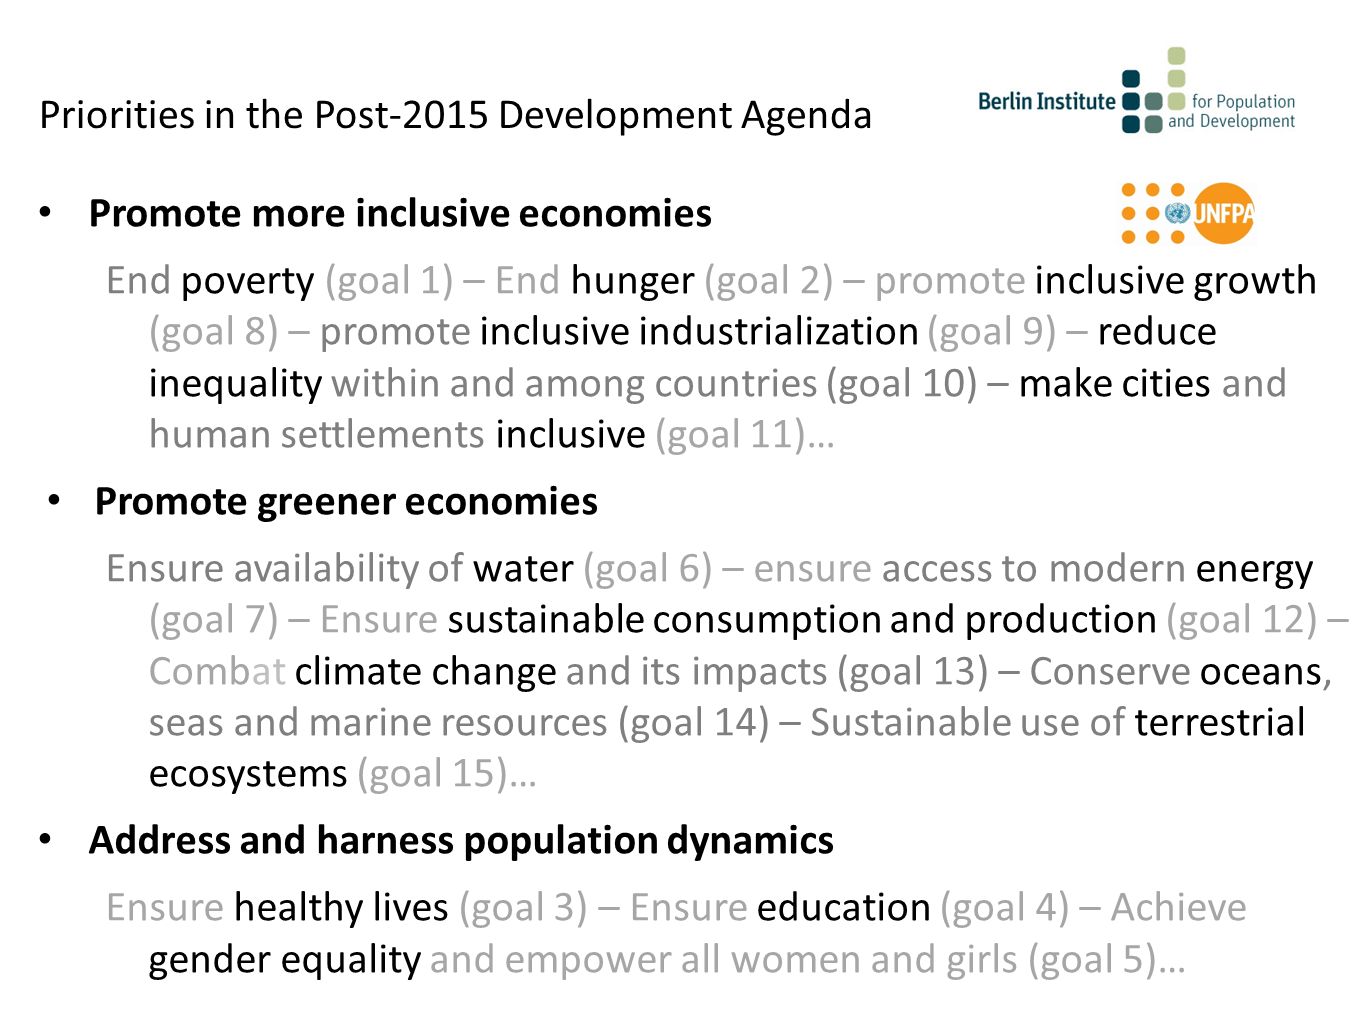 Promote more inclusive economies End poverty (goal 1) – End hunger (goal 2) – promote inclusive growth (goal 8) – promote inclusive industrialization (goal 9) – reduce inequality within and among countries (goal 10) – make cities and human settlements inclusive (goal 11)… Promote greener economies Ensure availability of water (goal 6) – ensure access to modern energy (goal 7) – Ensure sustainable consumption and production (goal 12) – Combat climate change and its impacts (goal 13) – Conserve oceans, seas and marine resources (goal 14) – Sustainable use of terrestrial ecosystems (goal 15)… Address and harness population dynamics Ensure healthy lives (goal 3) – Ensure education (goal 4) – Achieve gender equality and empower all women and girls (goal 5)… Priorities in the Post-2015 Development Agenda